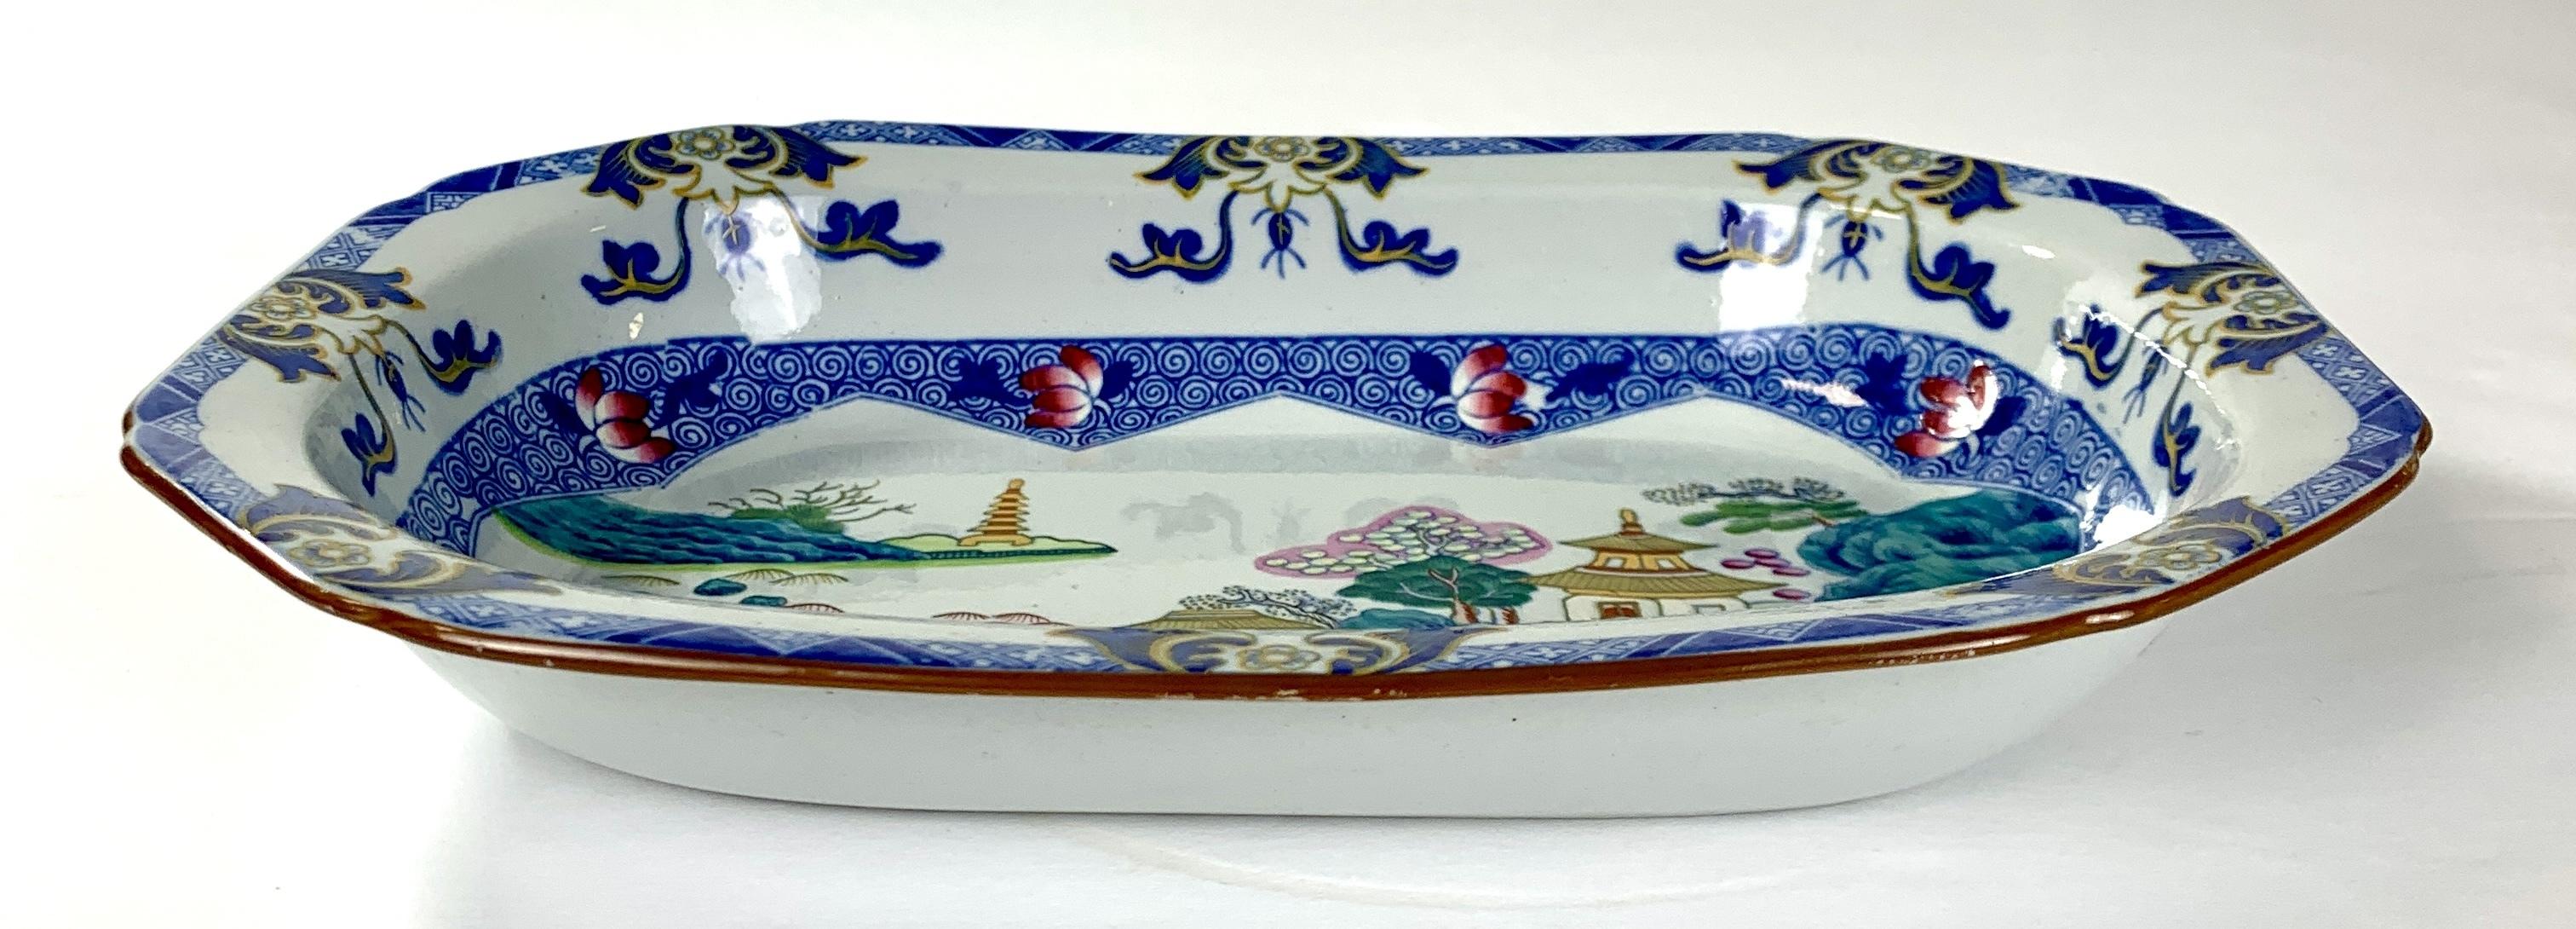 The center of this small English deep dish shows a dream-like chinoiserie scene.
It's a waterside view with trees emanating from rockwork, islands in the water, a pagoda, and houses with oriental-style roofs.
Each item is well painted in an